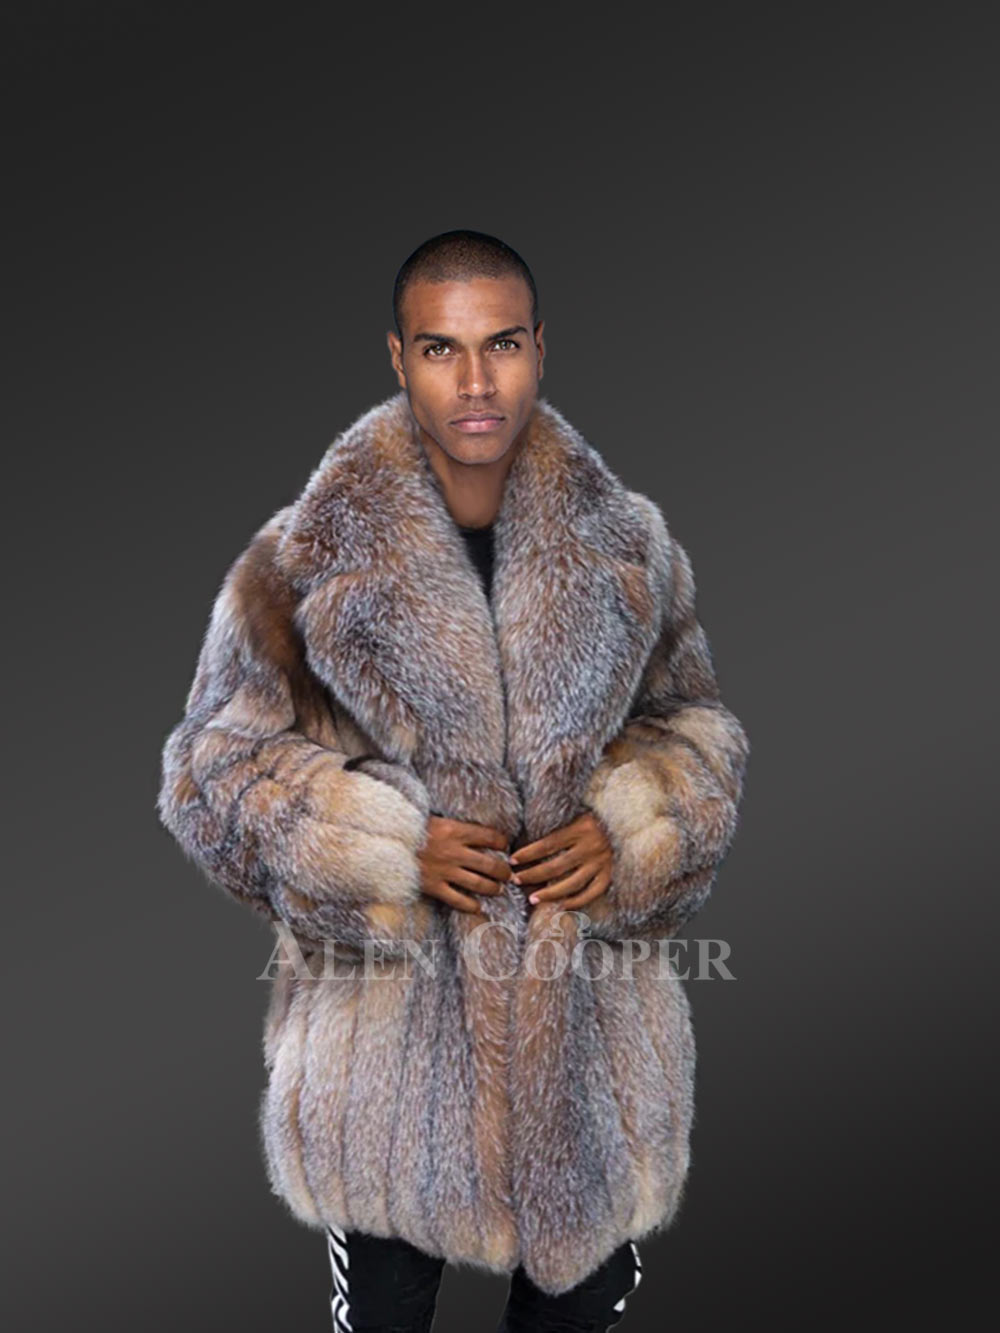 Fox Fur Jacket for Men with Full Sleeves Offers Significant Warmth